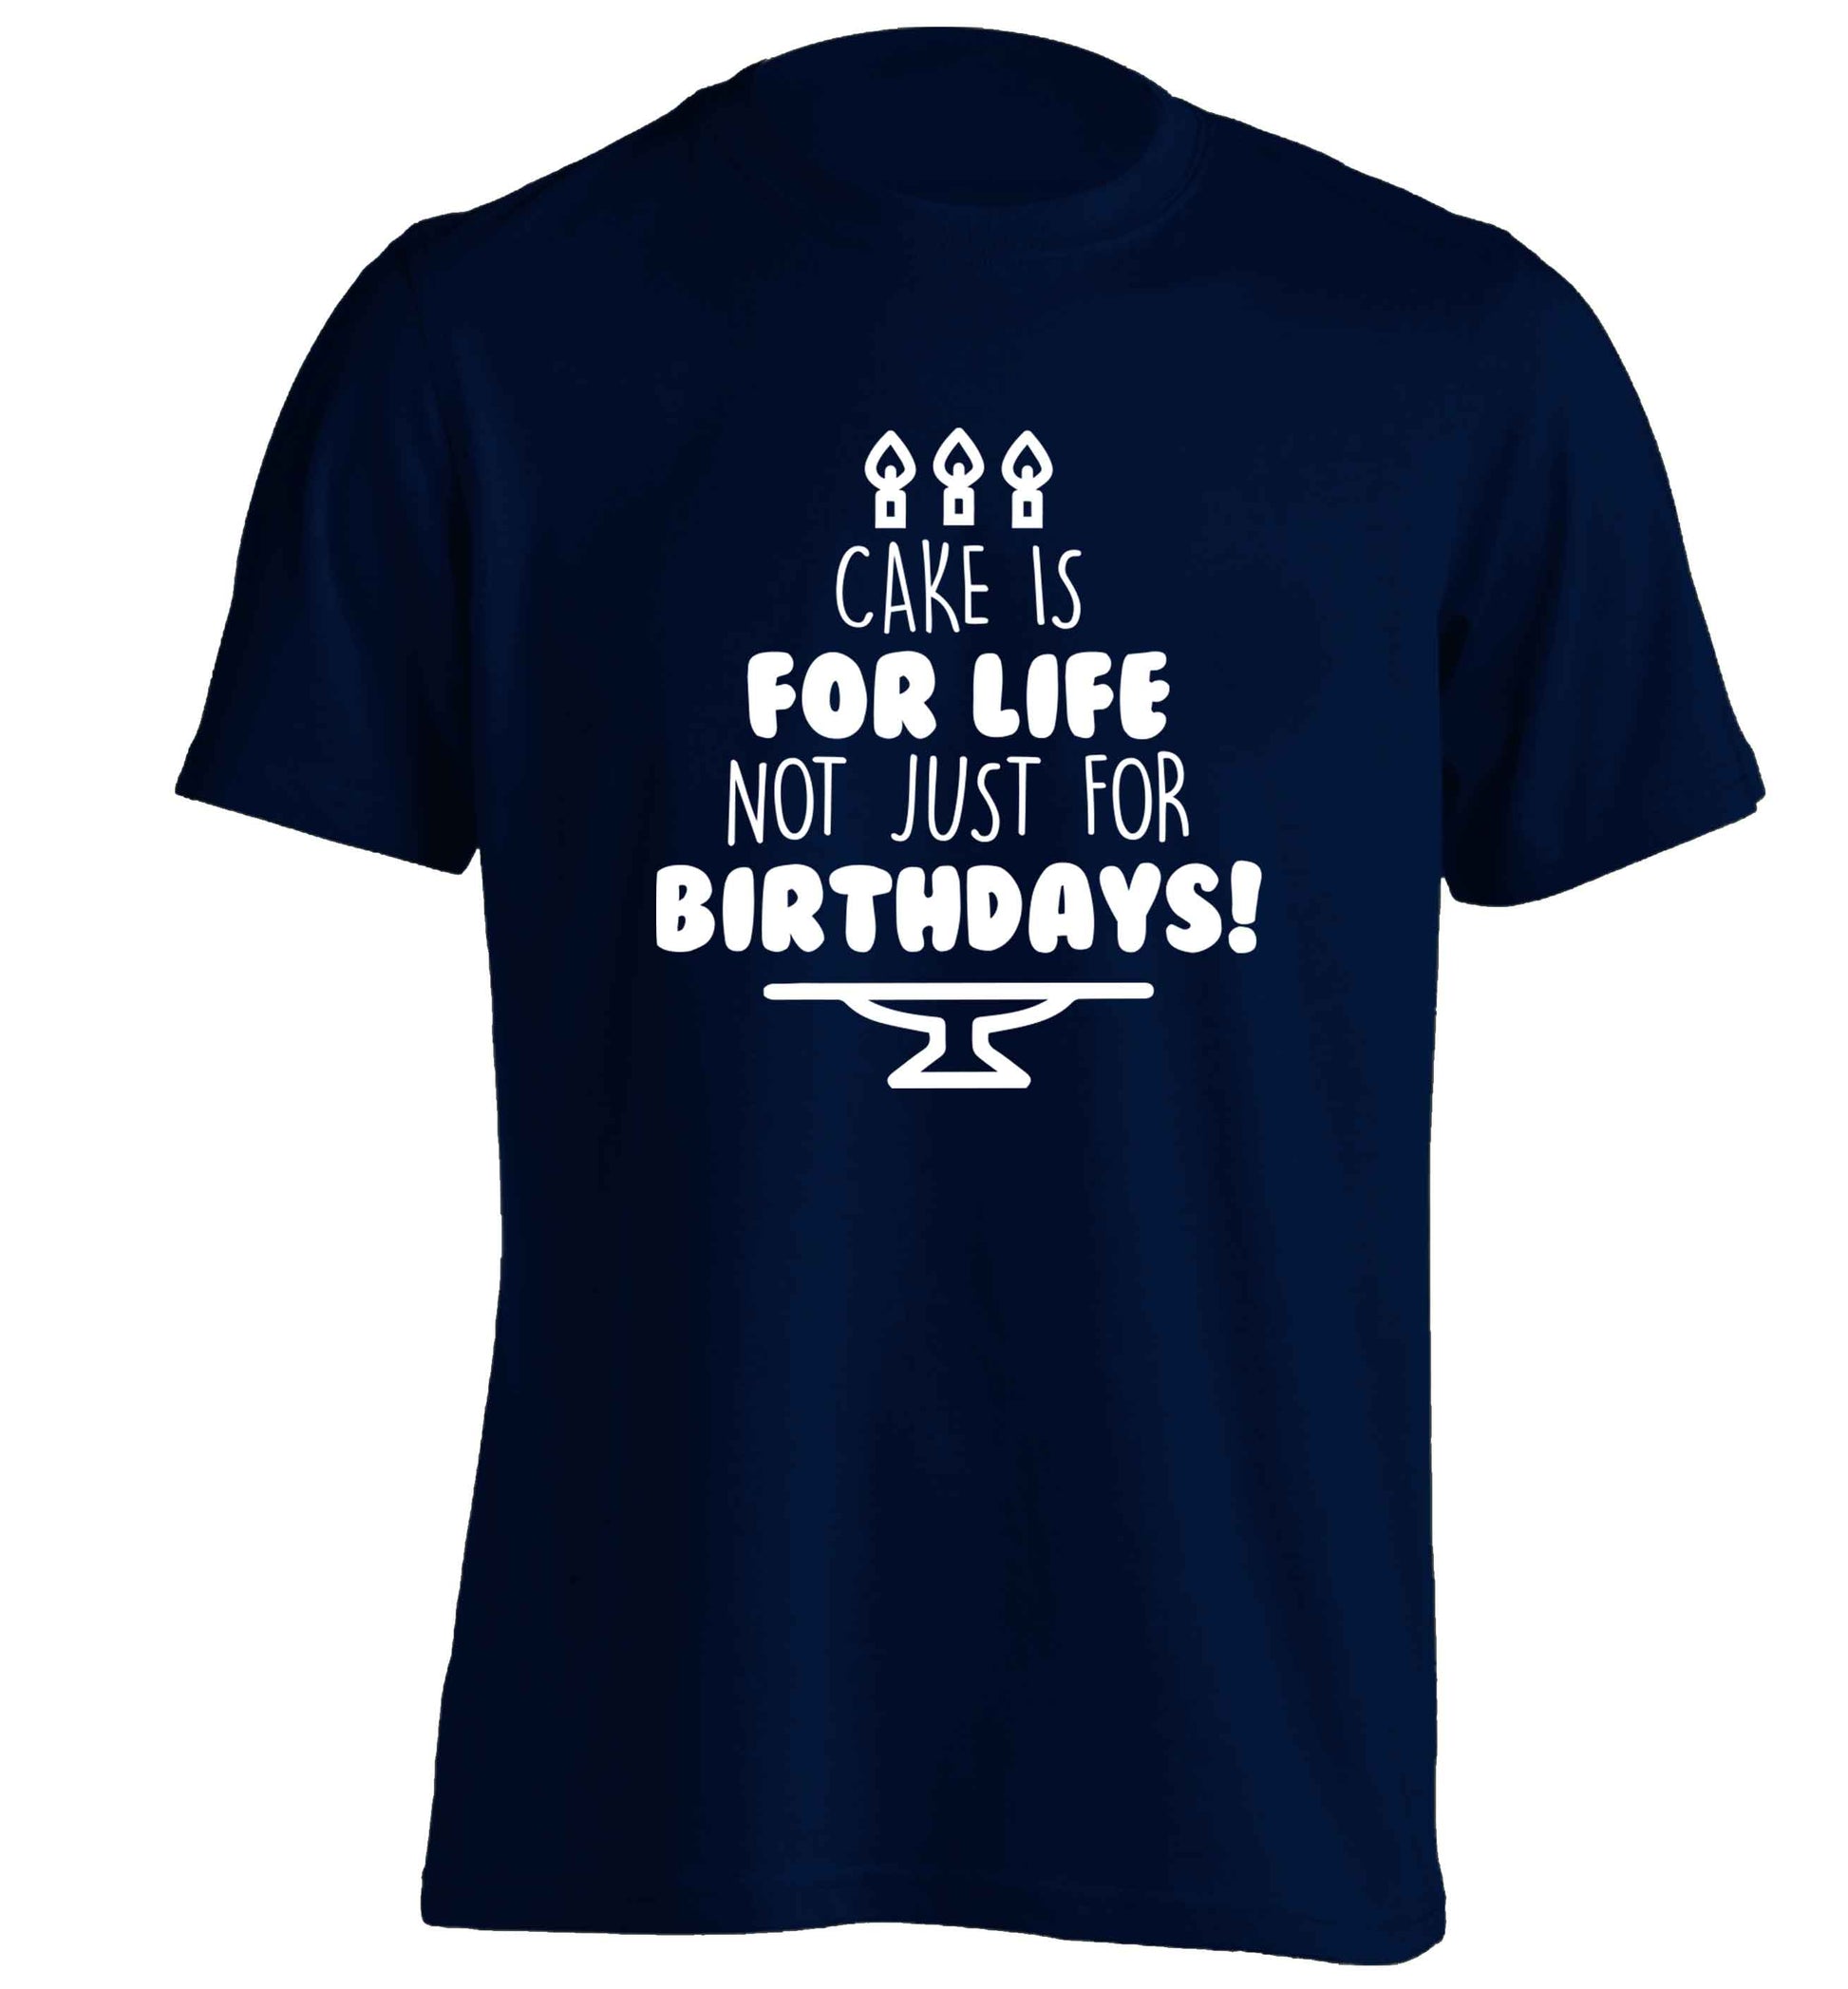 Cake is for life not just for birthdays adults unisex navy Tshirt 2XL